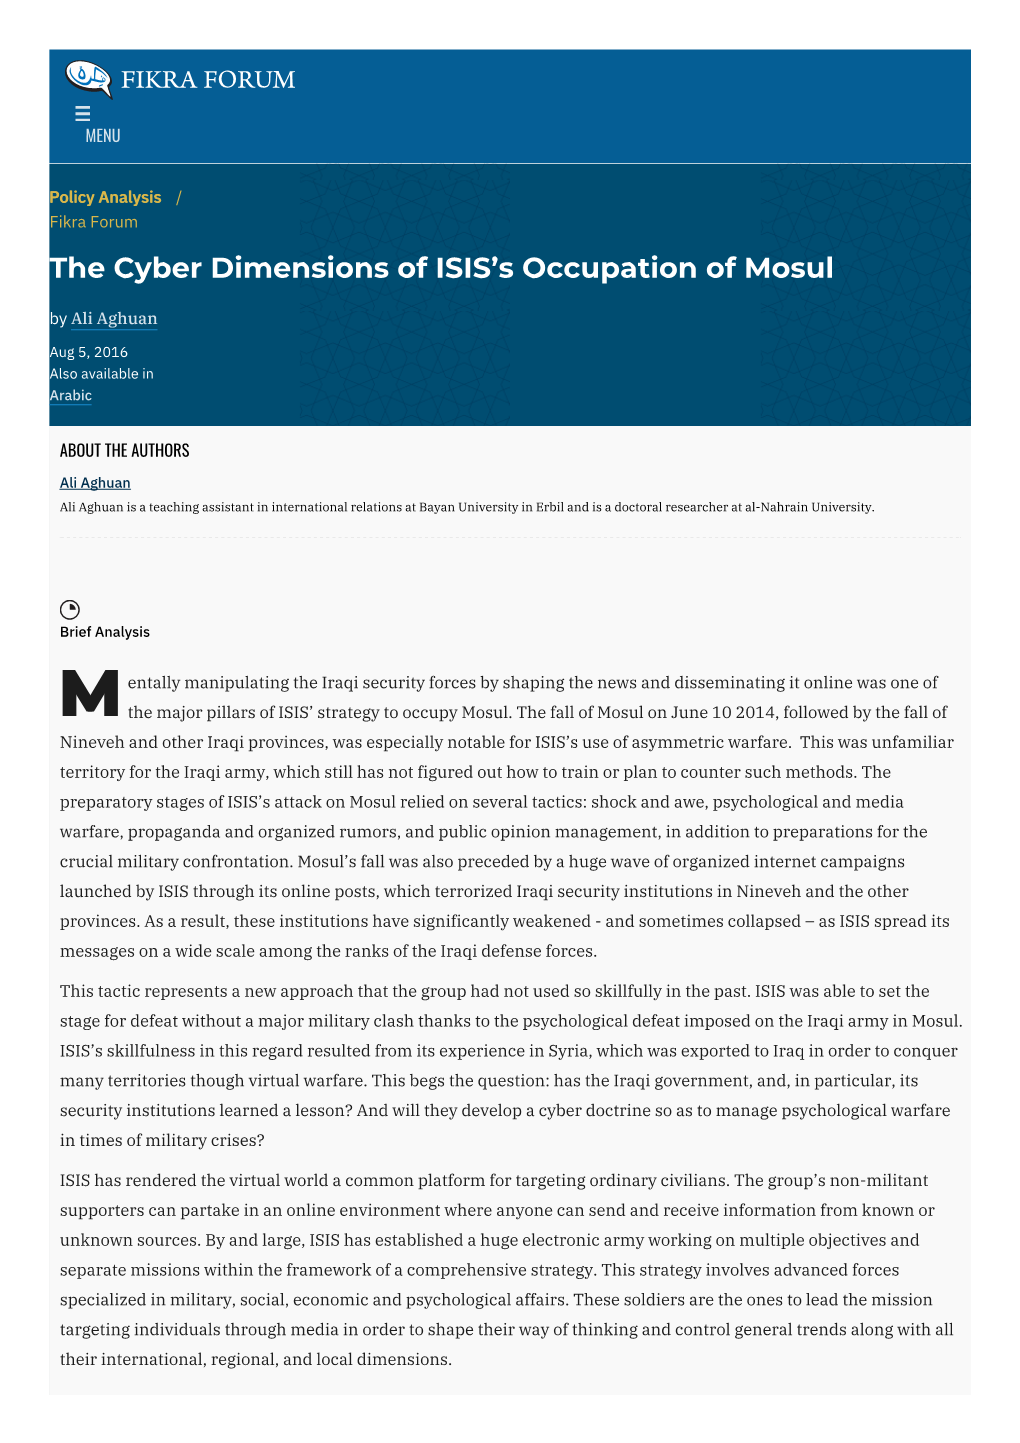 The Cyber Dimensions of ISIS's Occupation of Mosul | The